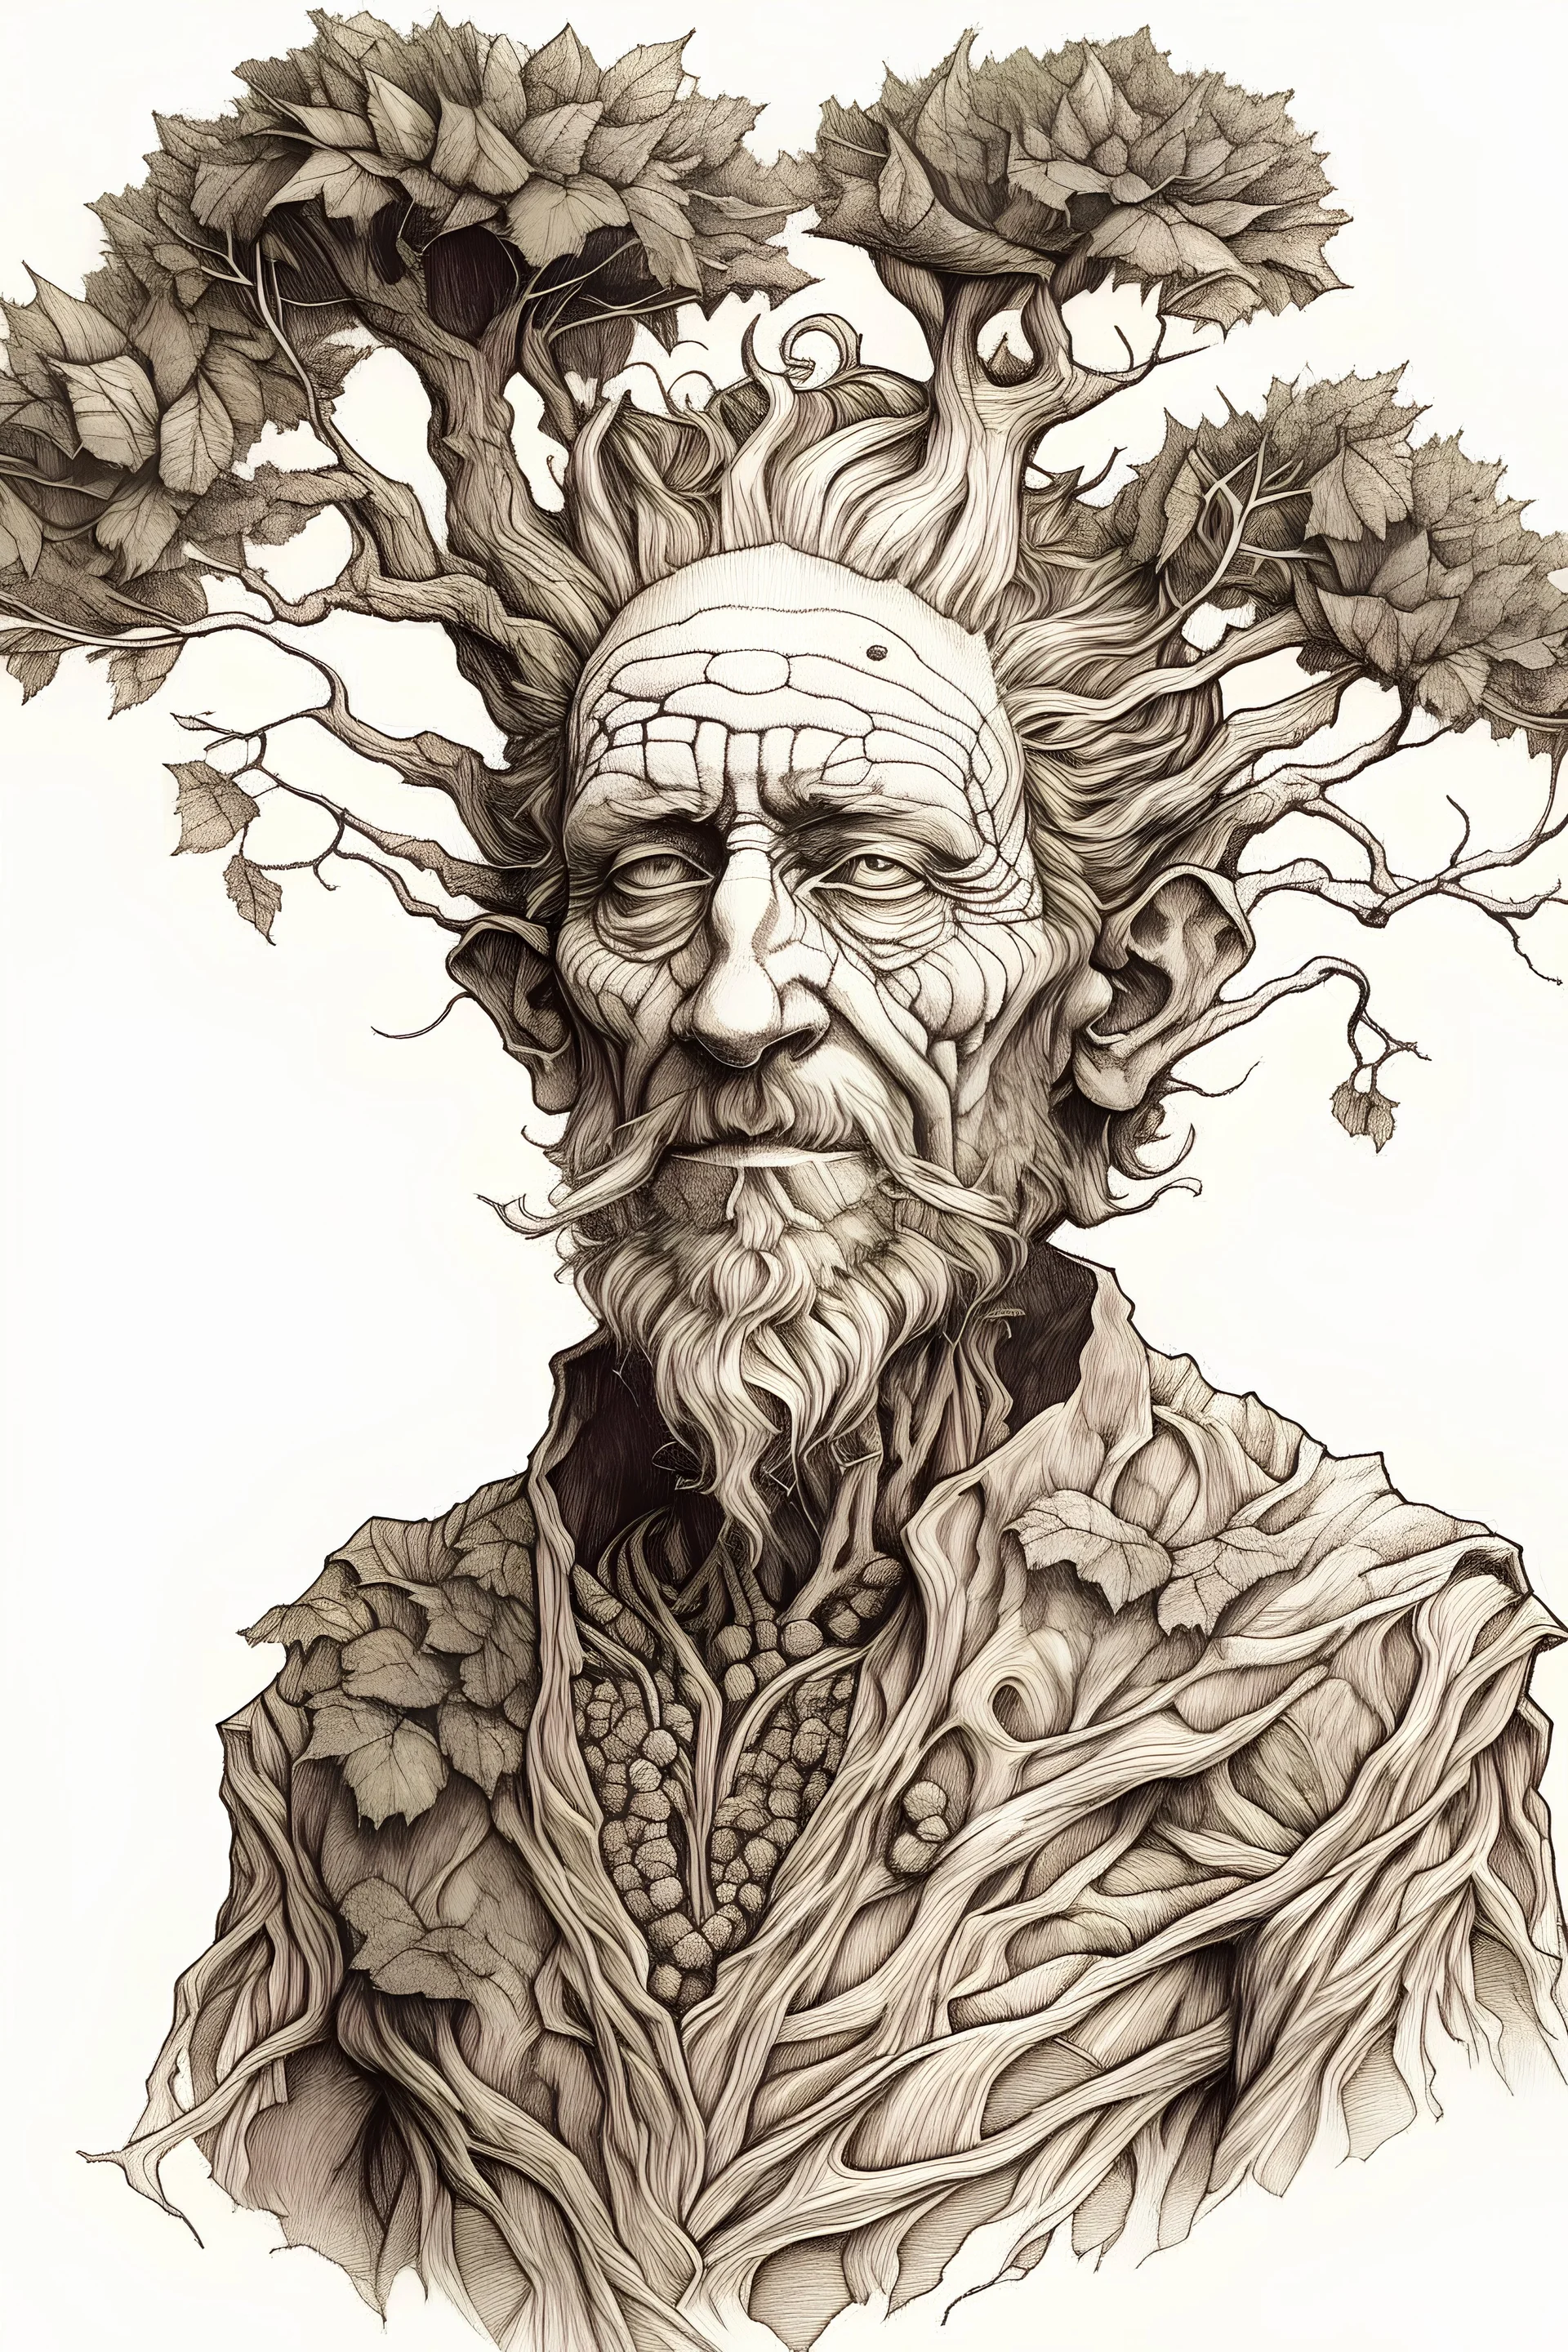 A treeking person in the style of mark johns, drawing